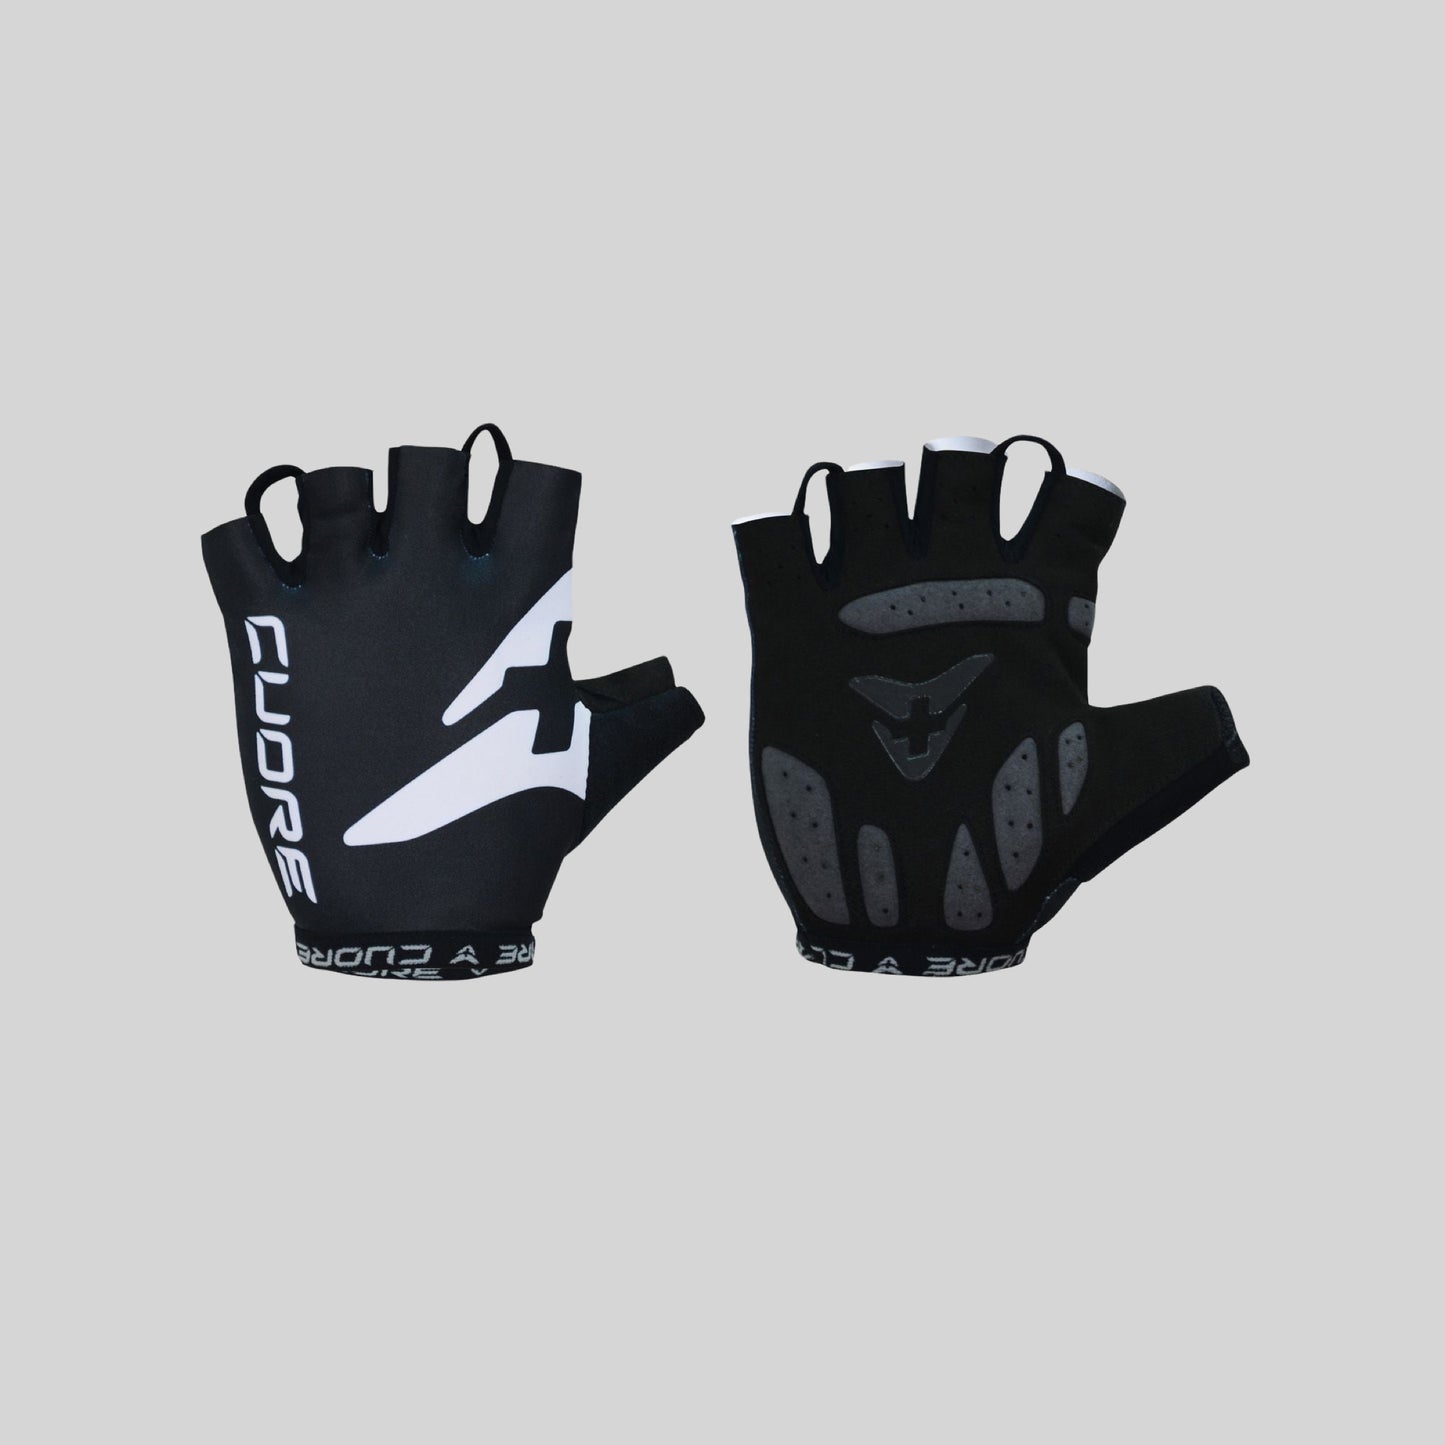 SF Unisex Gloves Ascender Cycling Club x Cuore of Switzerland